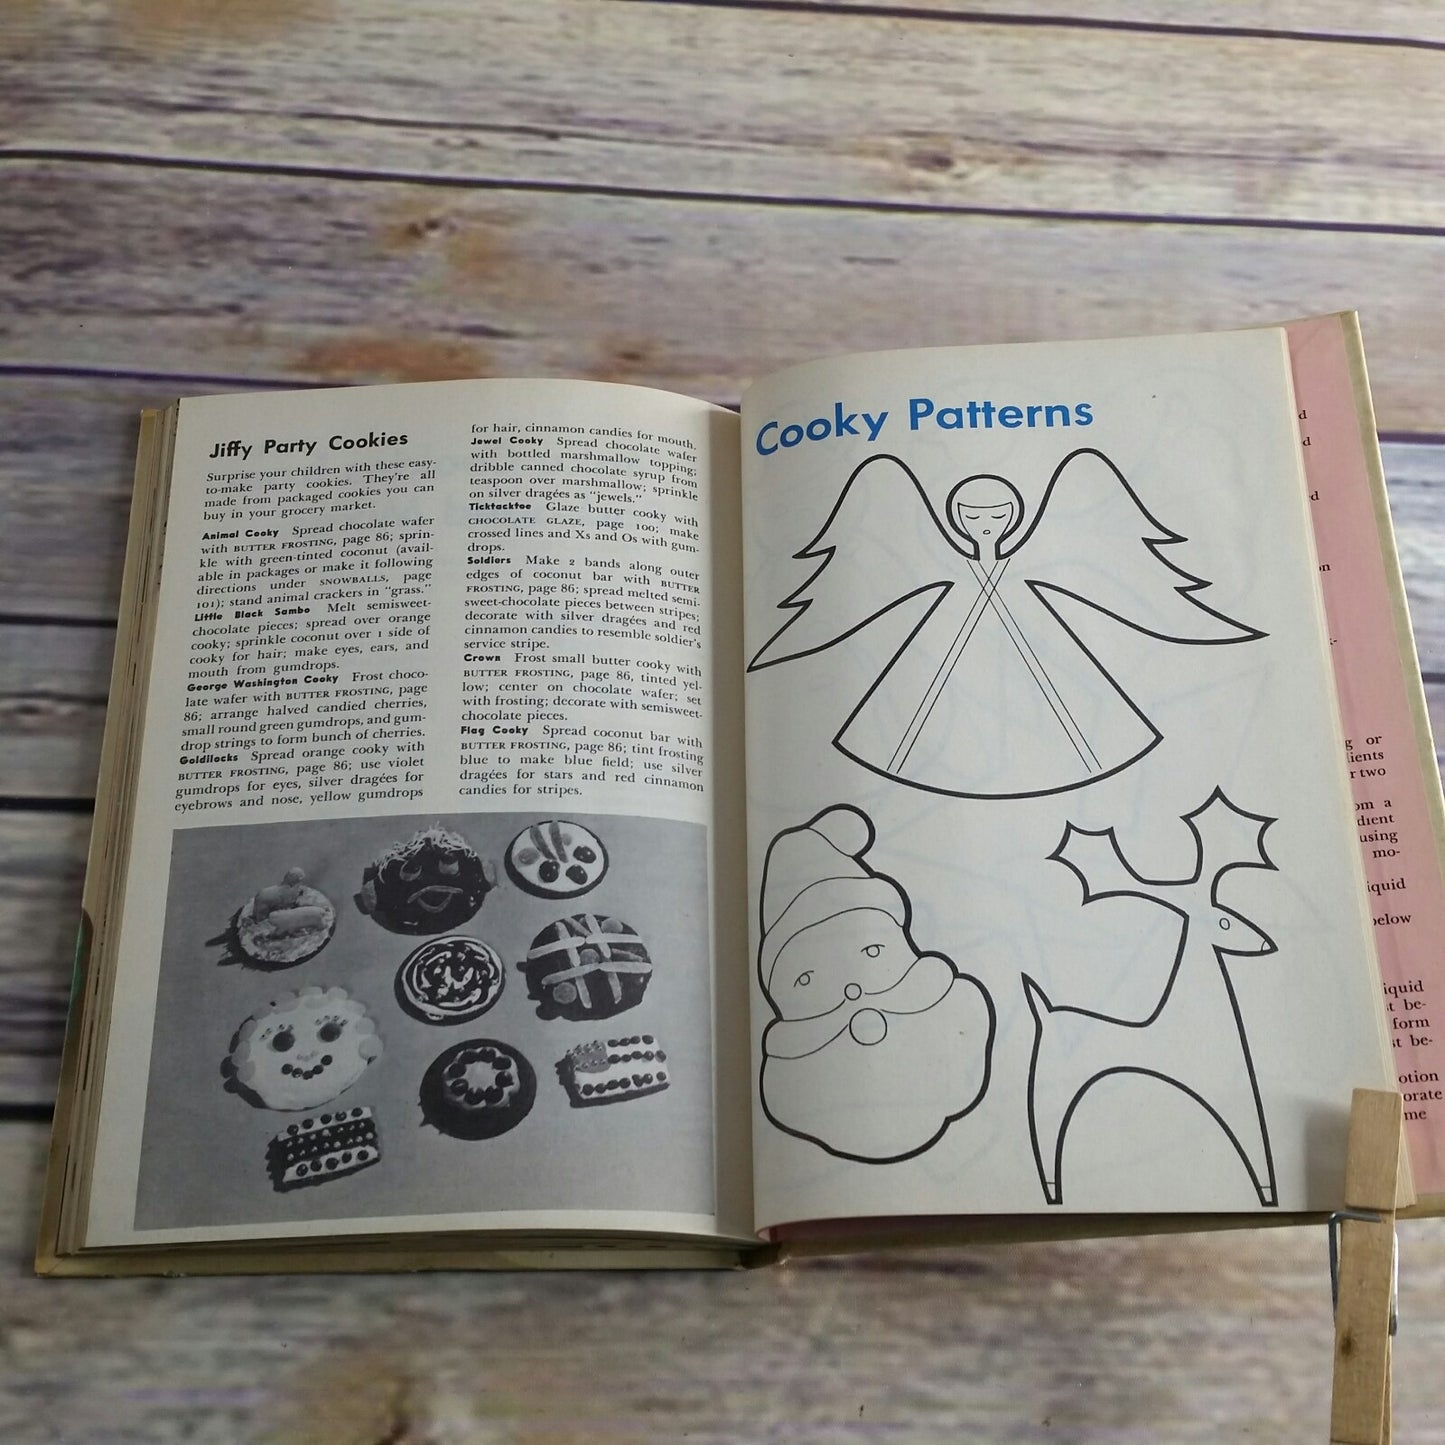 Vintage Cookbook Family Circle Cake and Cooky Recipes Tips Cookie 1953 Hardcover Baking